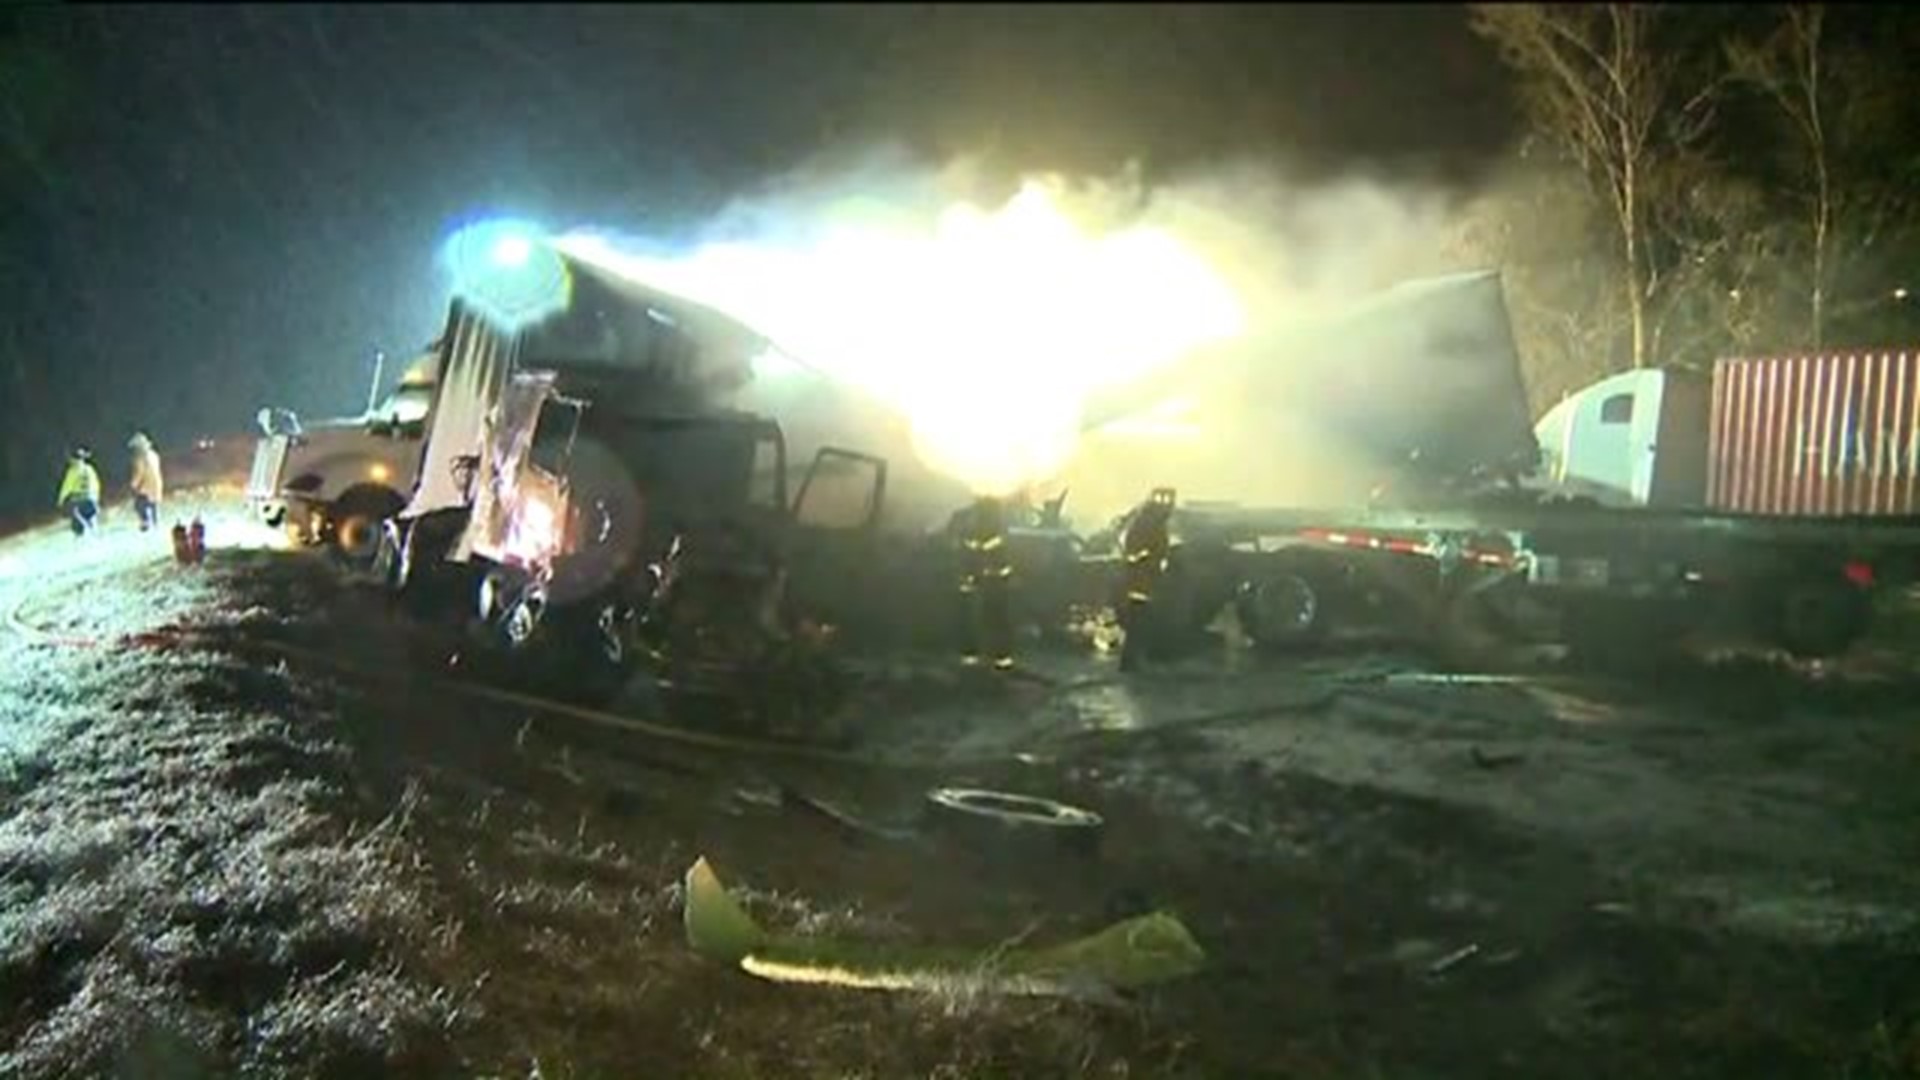 Interstate 81 in Lackawanna County Reopened after Fiery Wreck